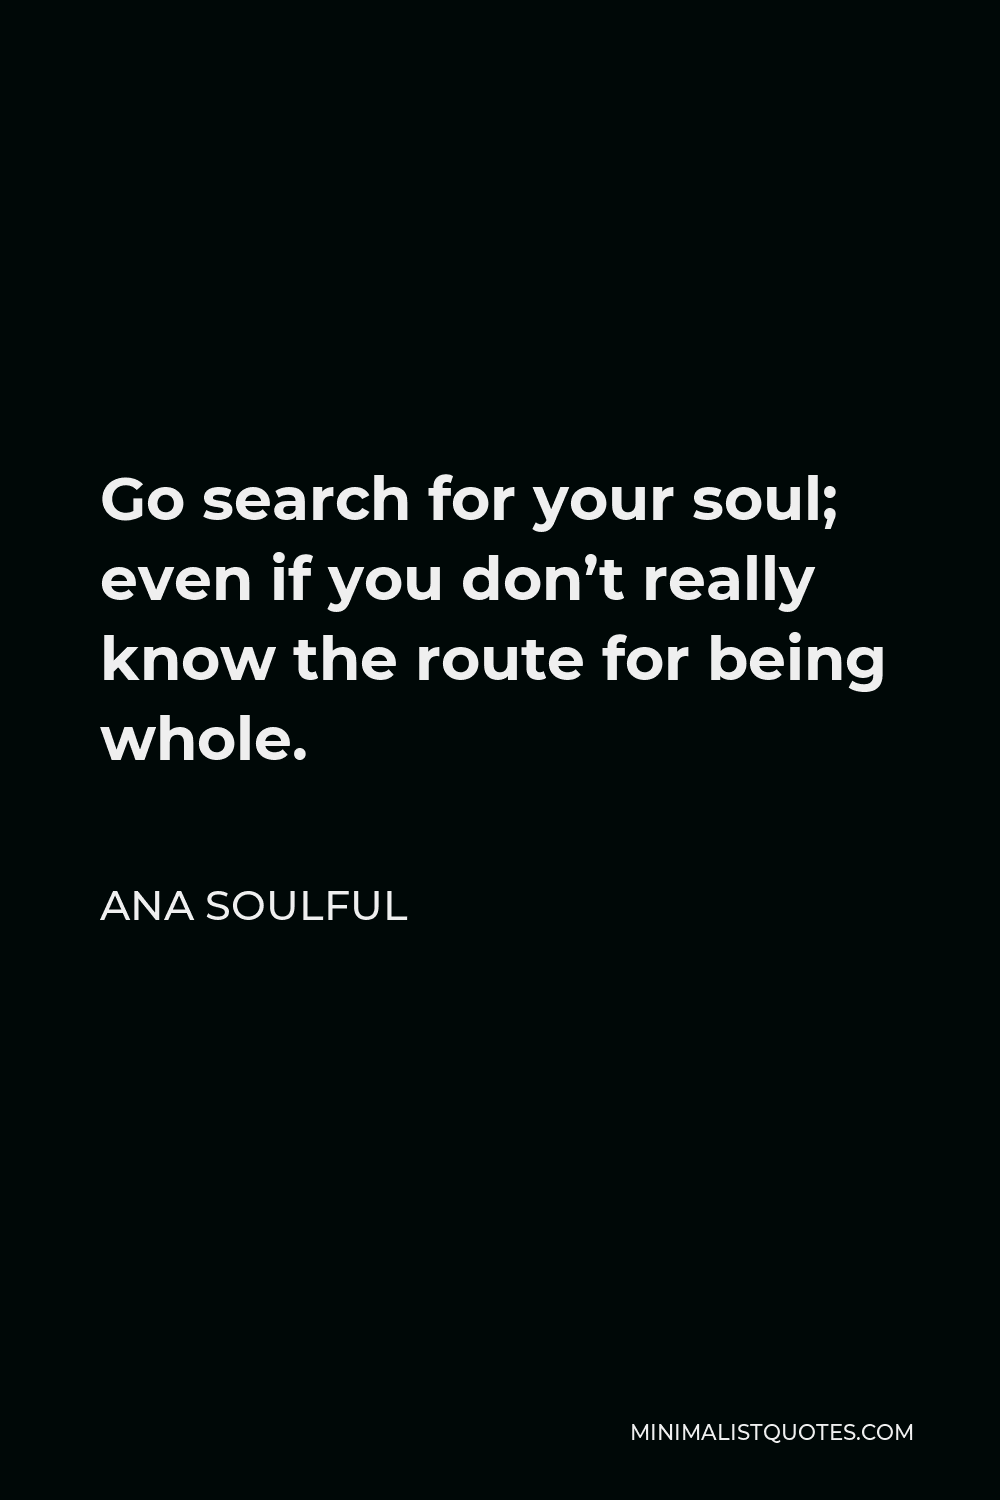 Ana Soulful Quote - Go search for your soul; even if you don’t really know the route for being whole.